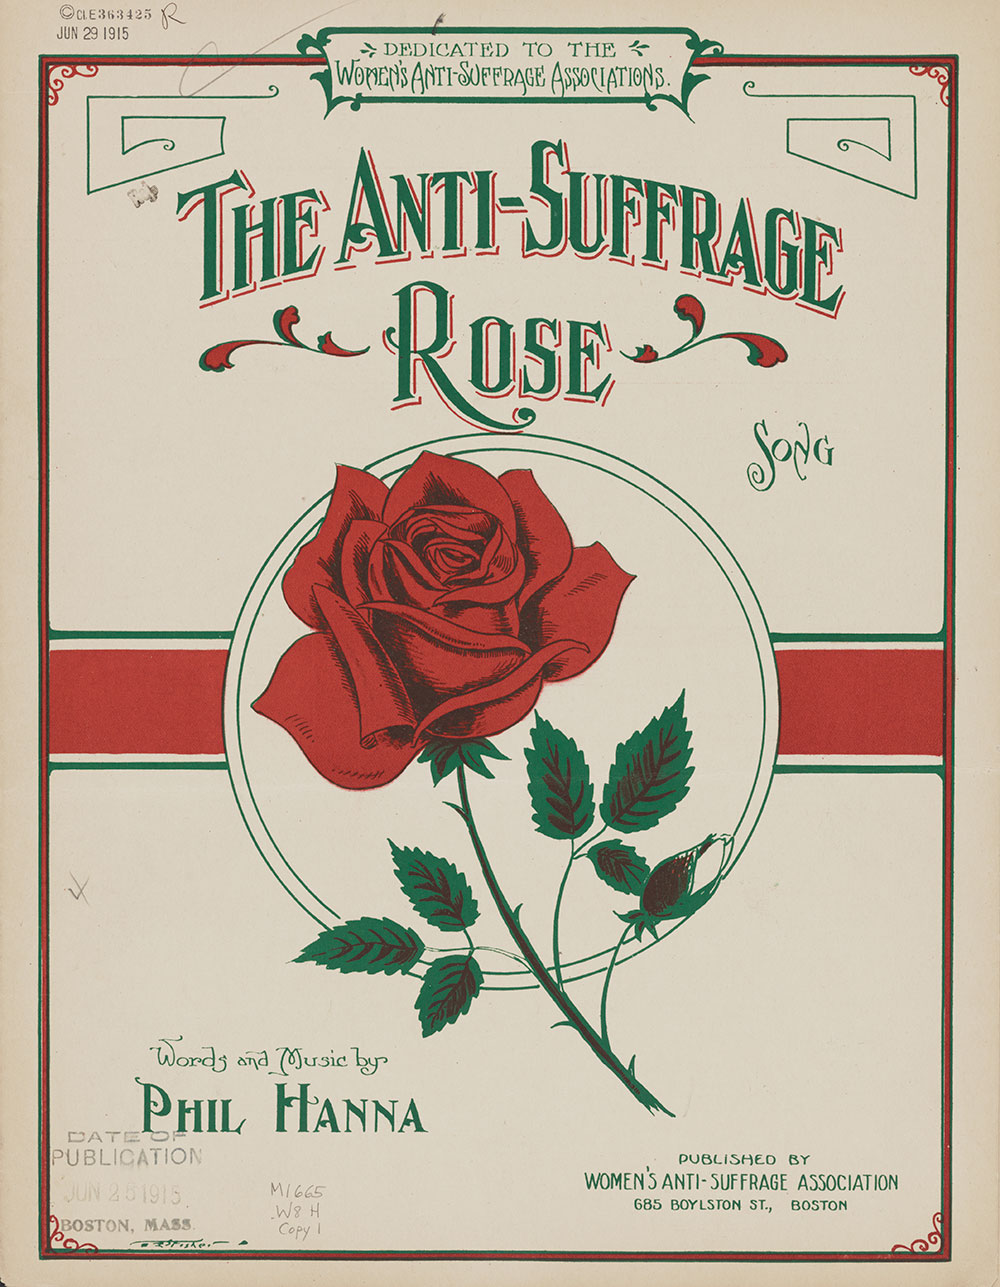 Phil Hanna, "The Anti-Suffrage Rose," a song for voice and piano, published by the Women's Anti-Suffrage Association, Boston, Massachusetts, 1915. (Library of Congress)